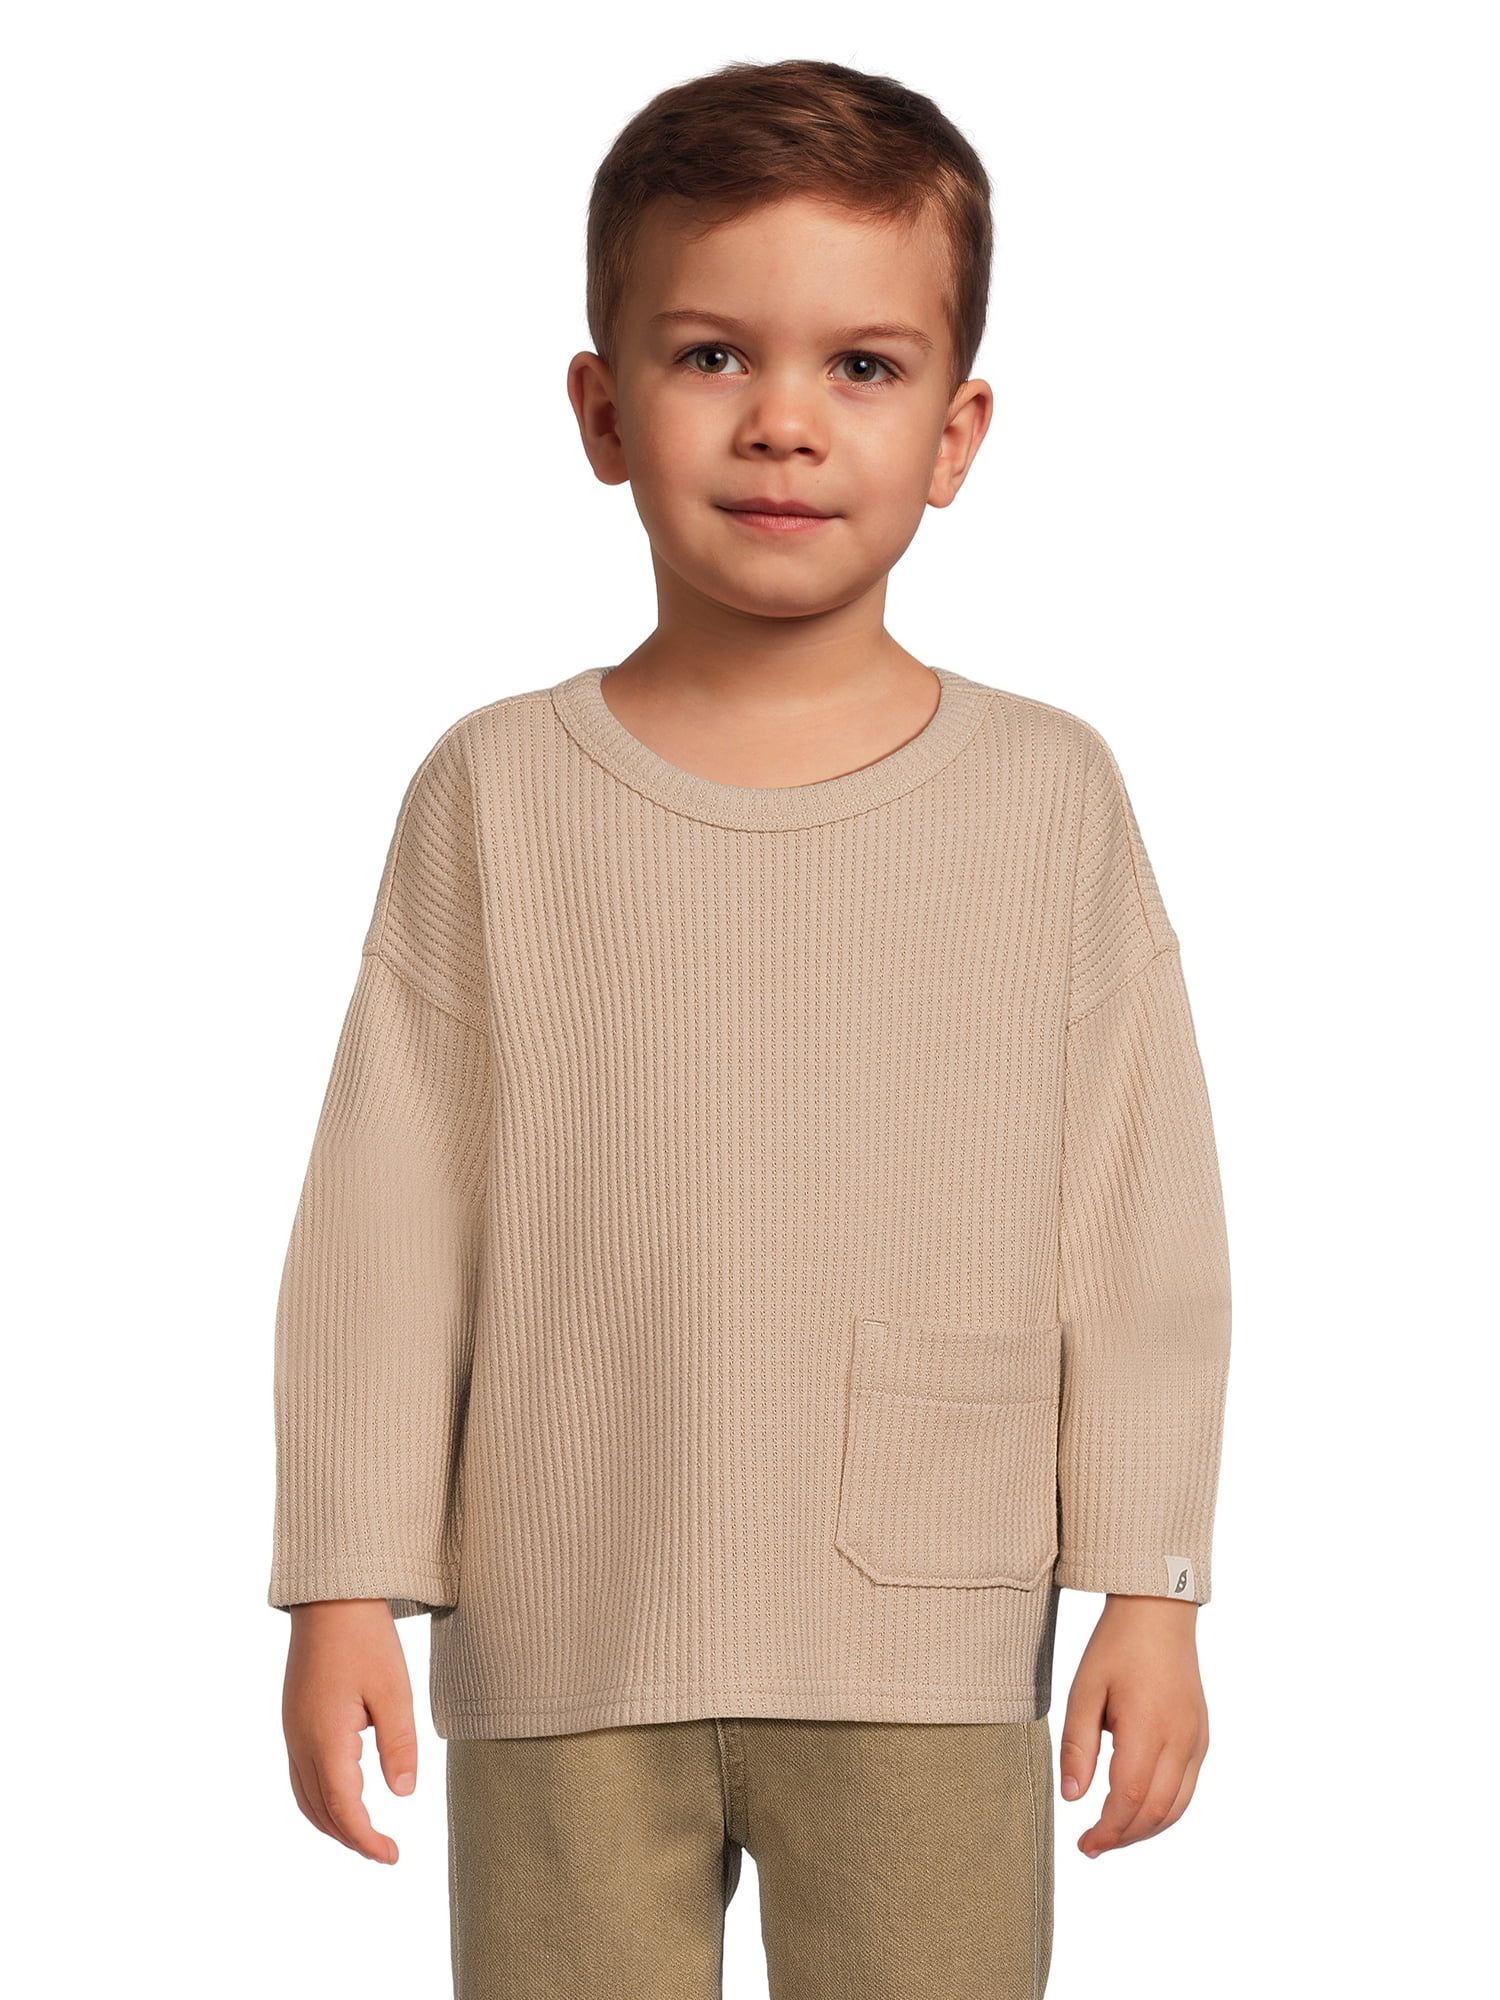 easy-peasy Toddler Boy Long Sleeve Boxy T-Shirt, Sizes 12 Months-5T | Walmart (US)